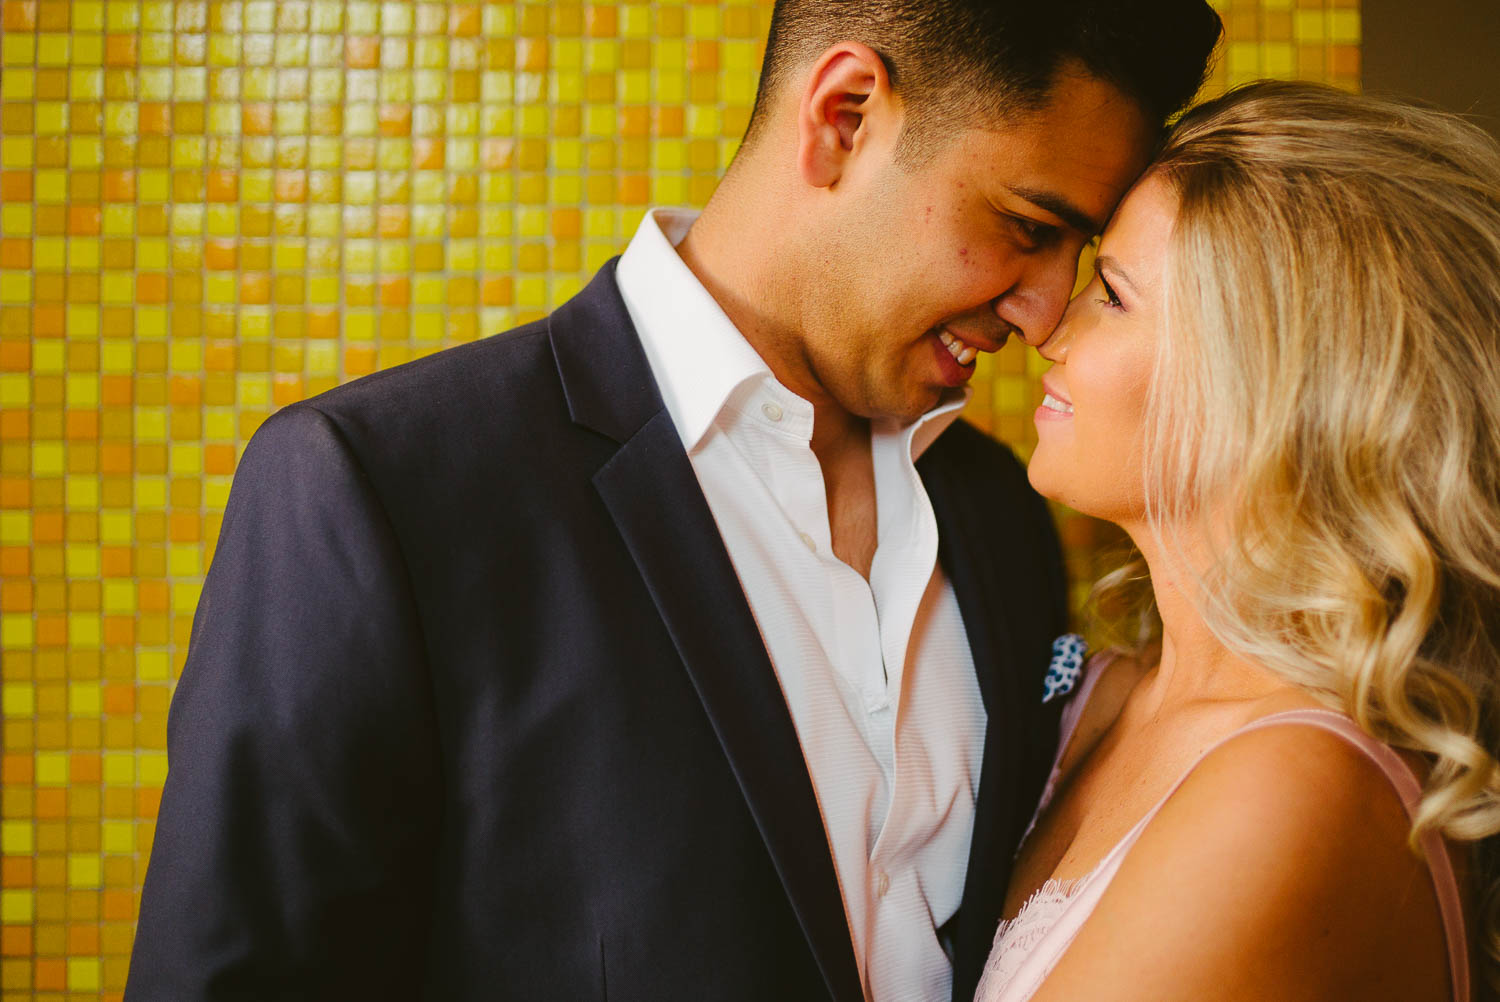 Brittaney and Nathan cuddle during an engagement session against gold colored mosaic wall